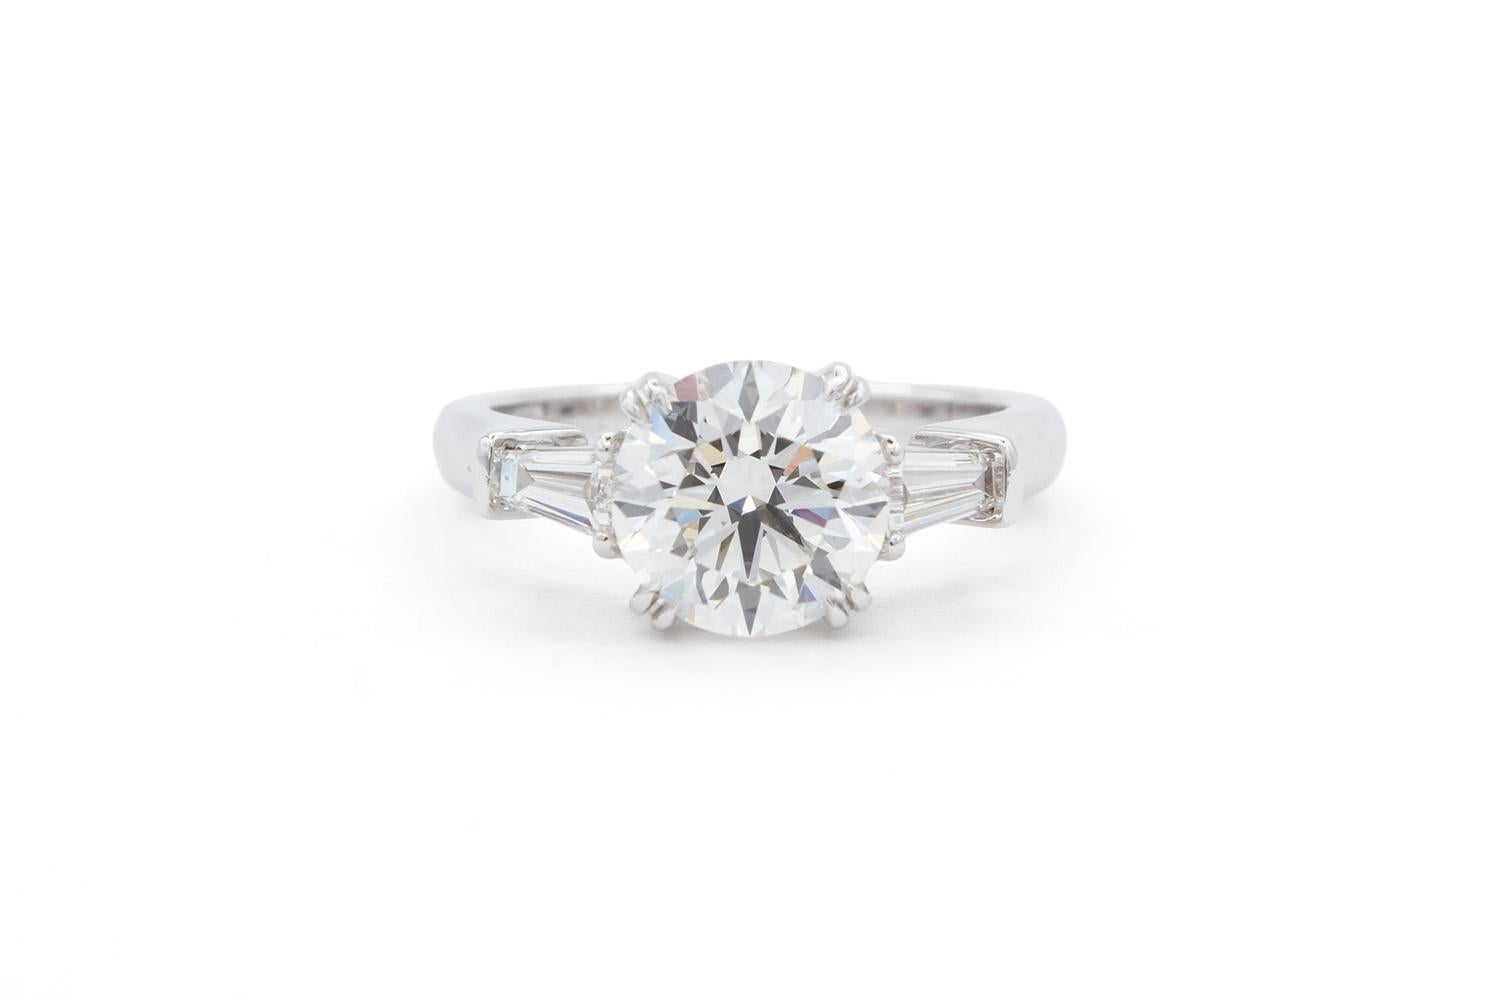 We are pleased to offer this Harry Winston GIA Certified Three Stone Platinum Diamond Engagement Ring. This beautiful classic Harry Winston ring features a GIA certified 1.90ct F/VS1 triple excellent round brilliant cut diamond set in a Harry